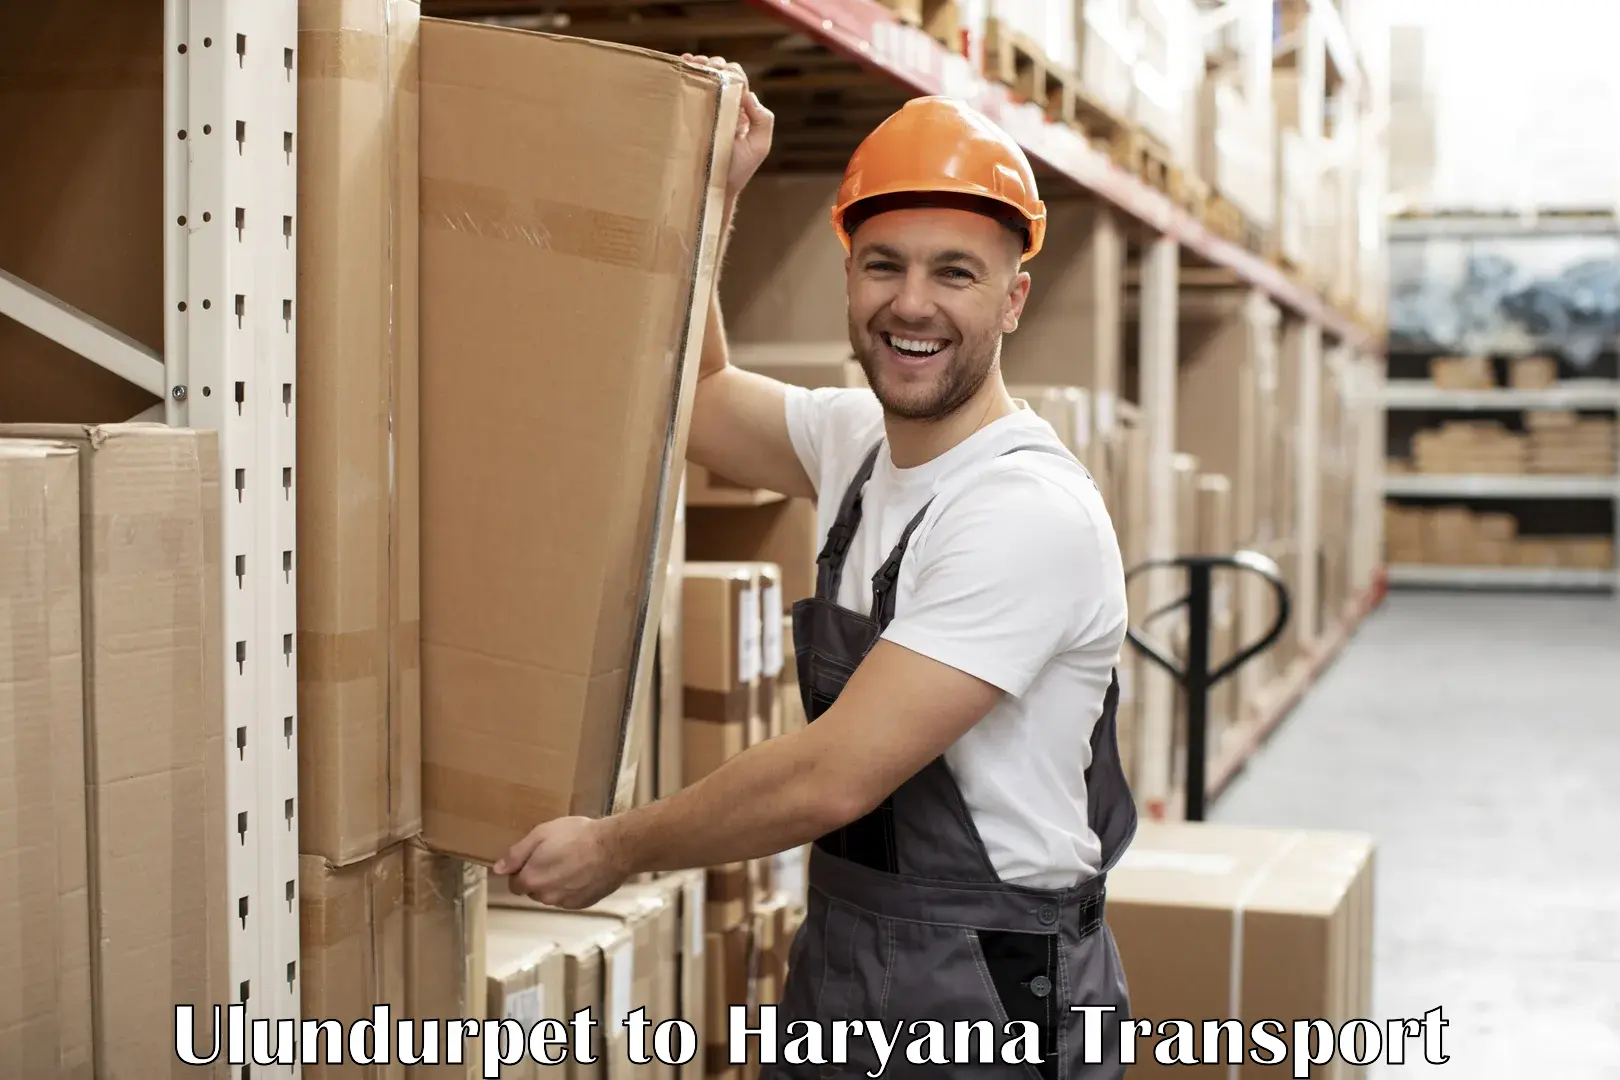 Nationwide transport services Ulundurpet to NCR Haryana